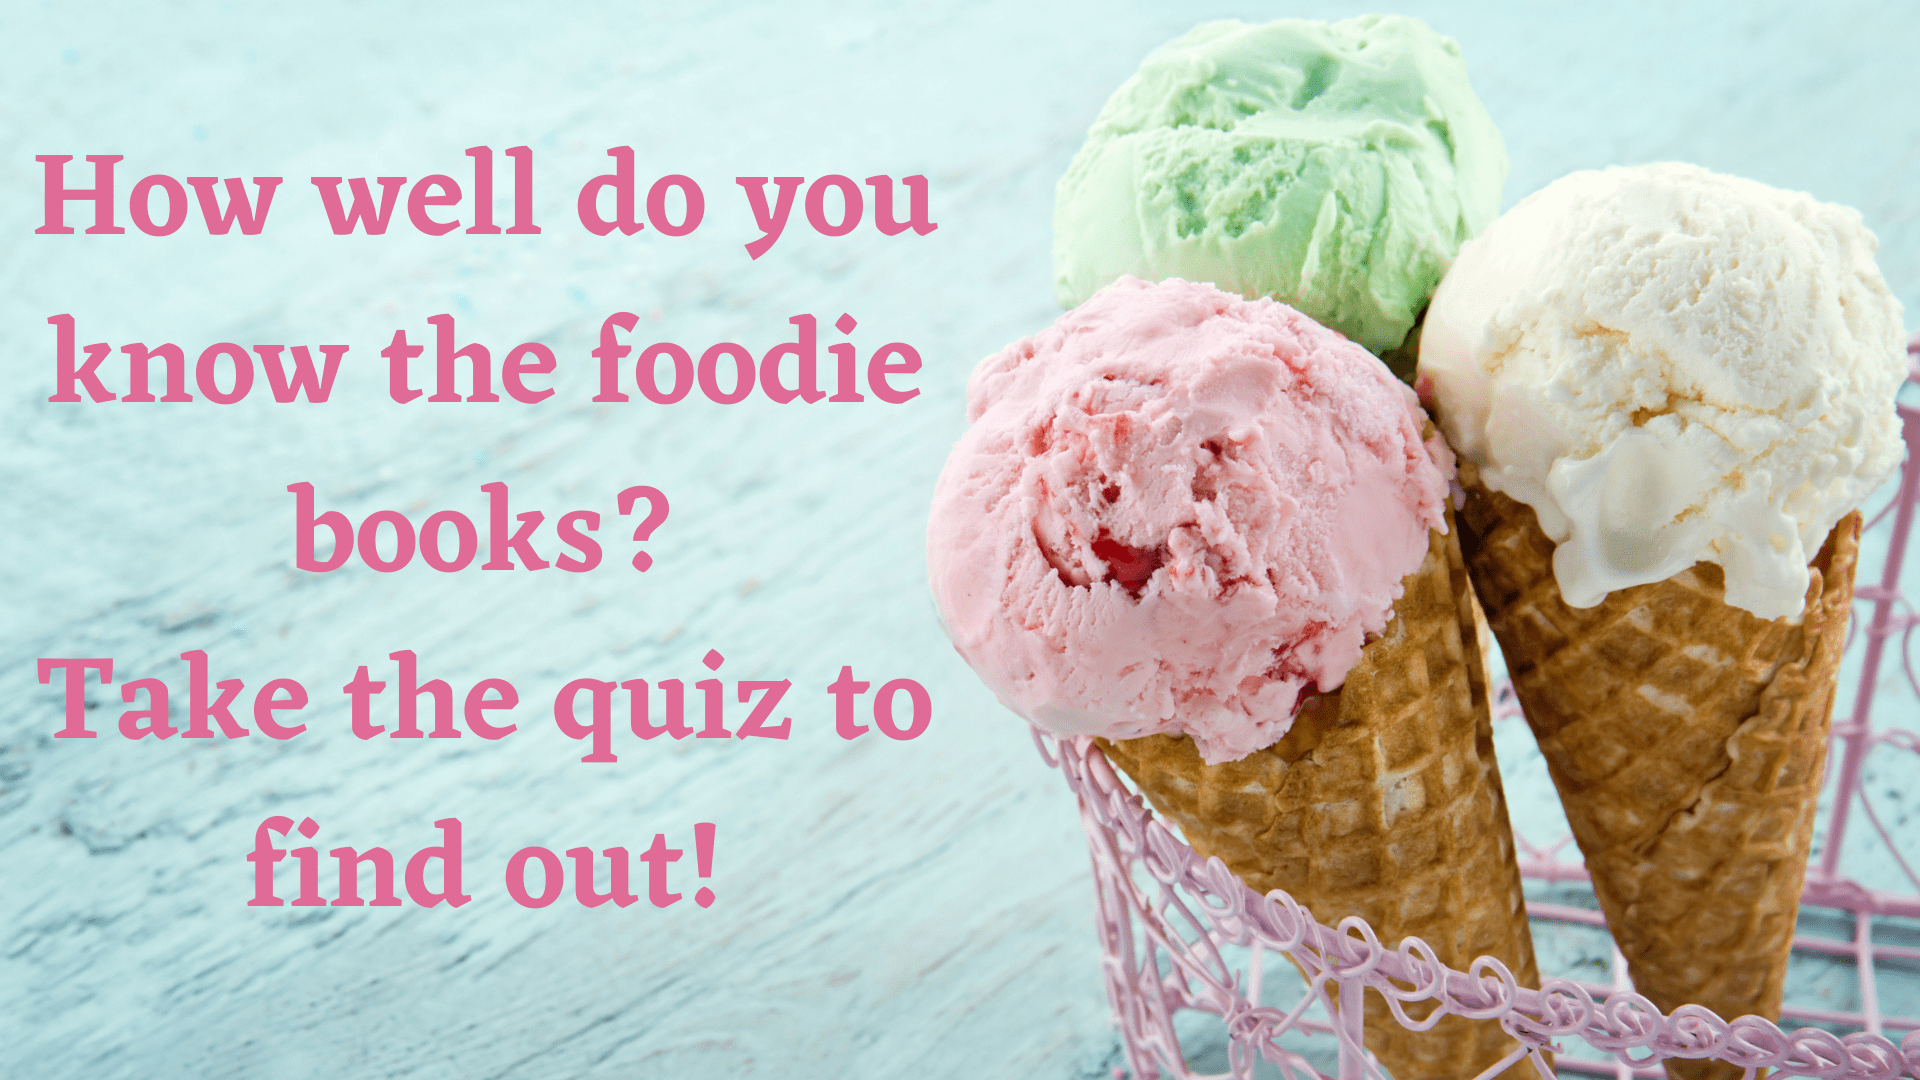 11How Well Do You know the Foodie Books?